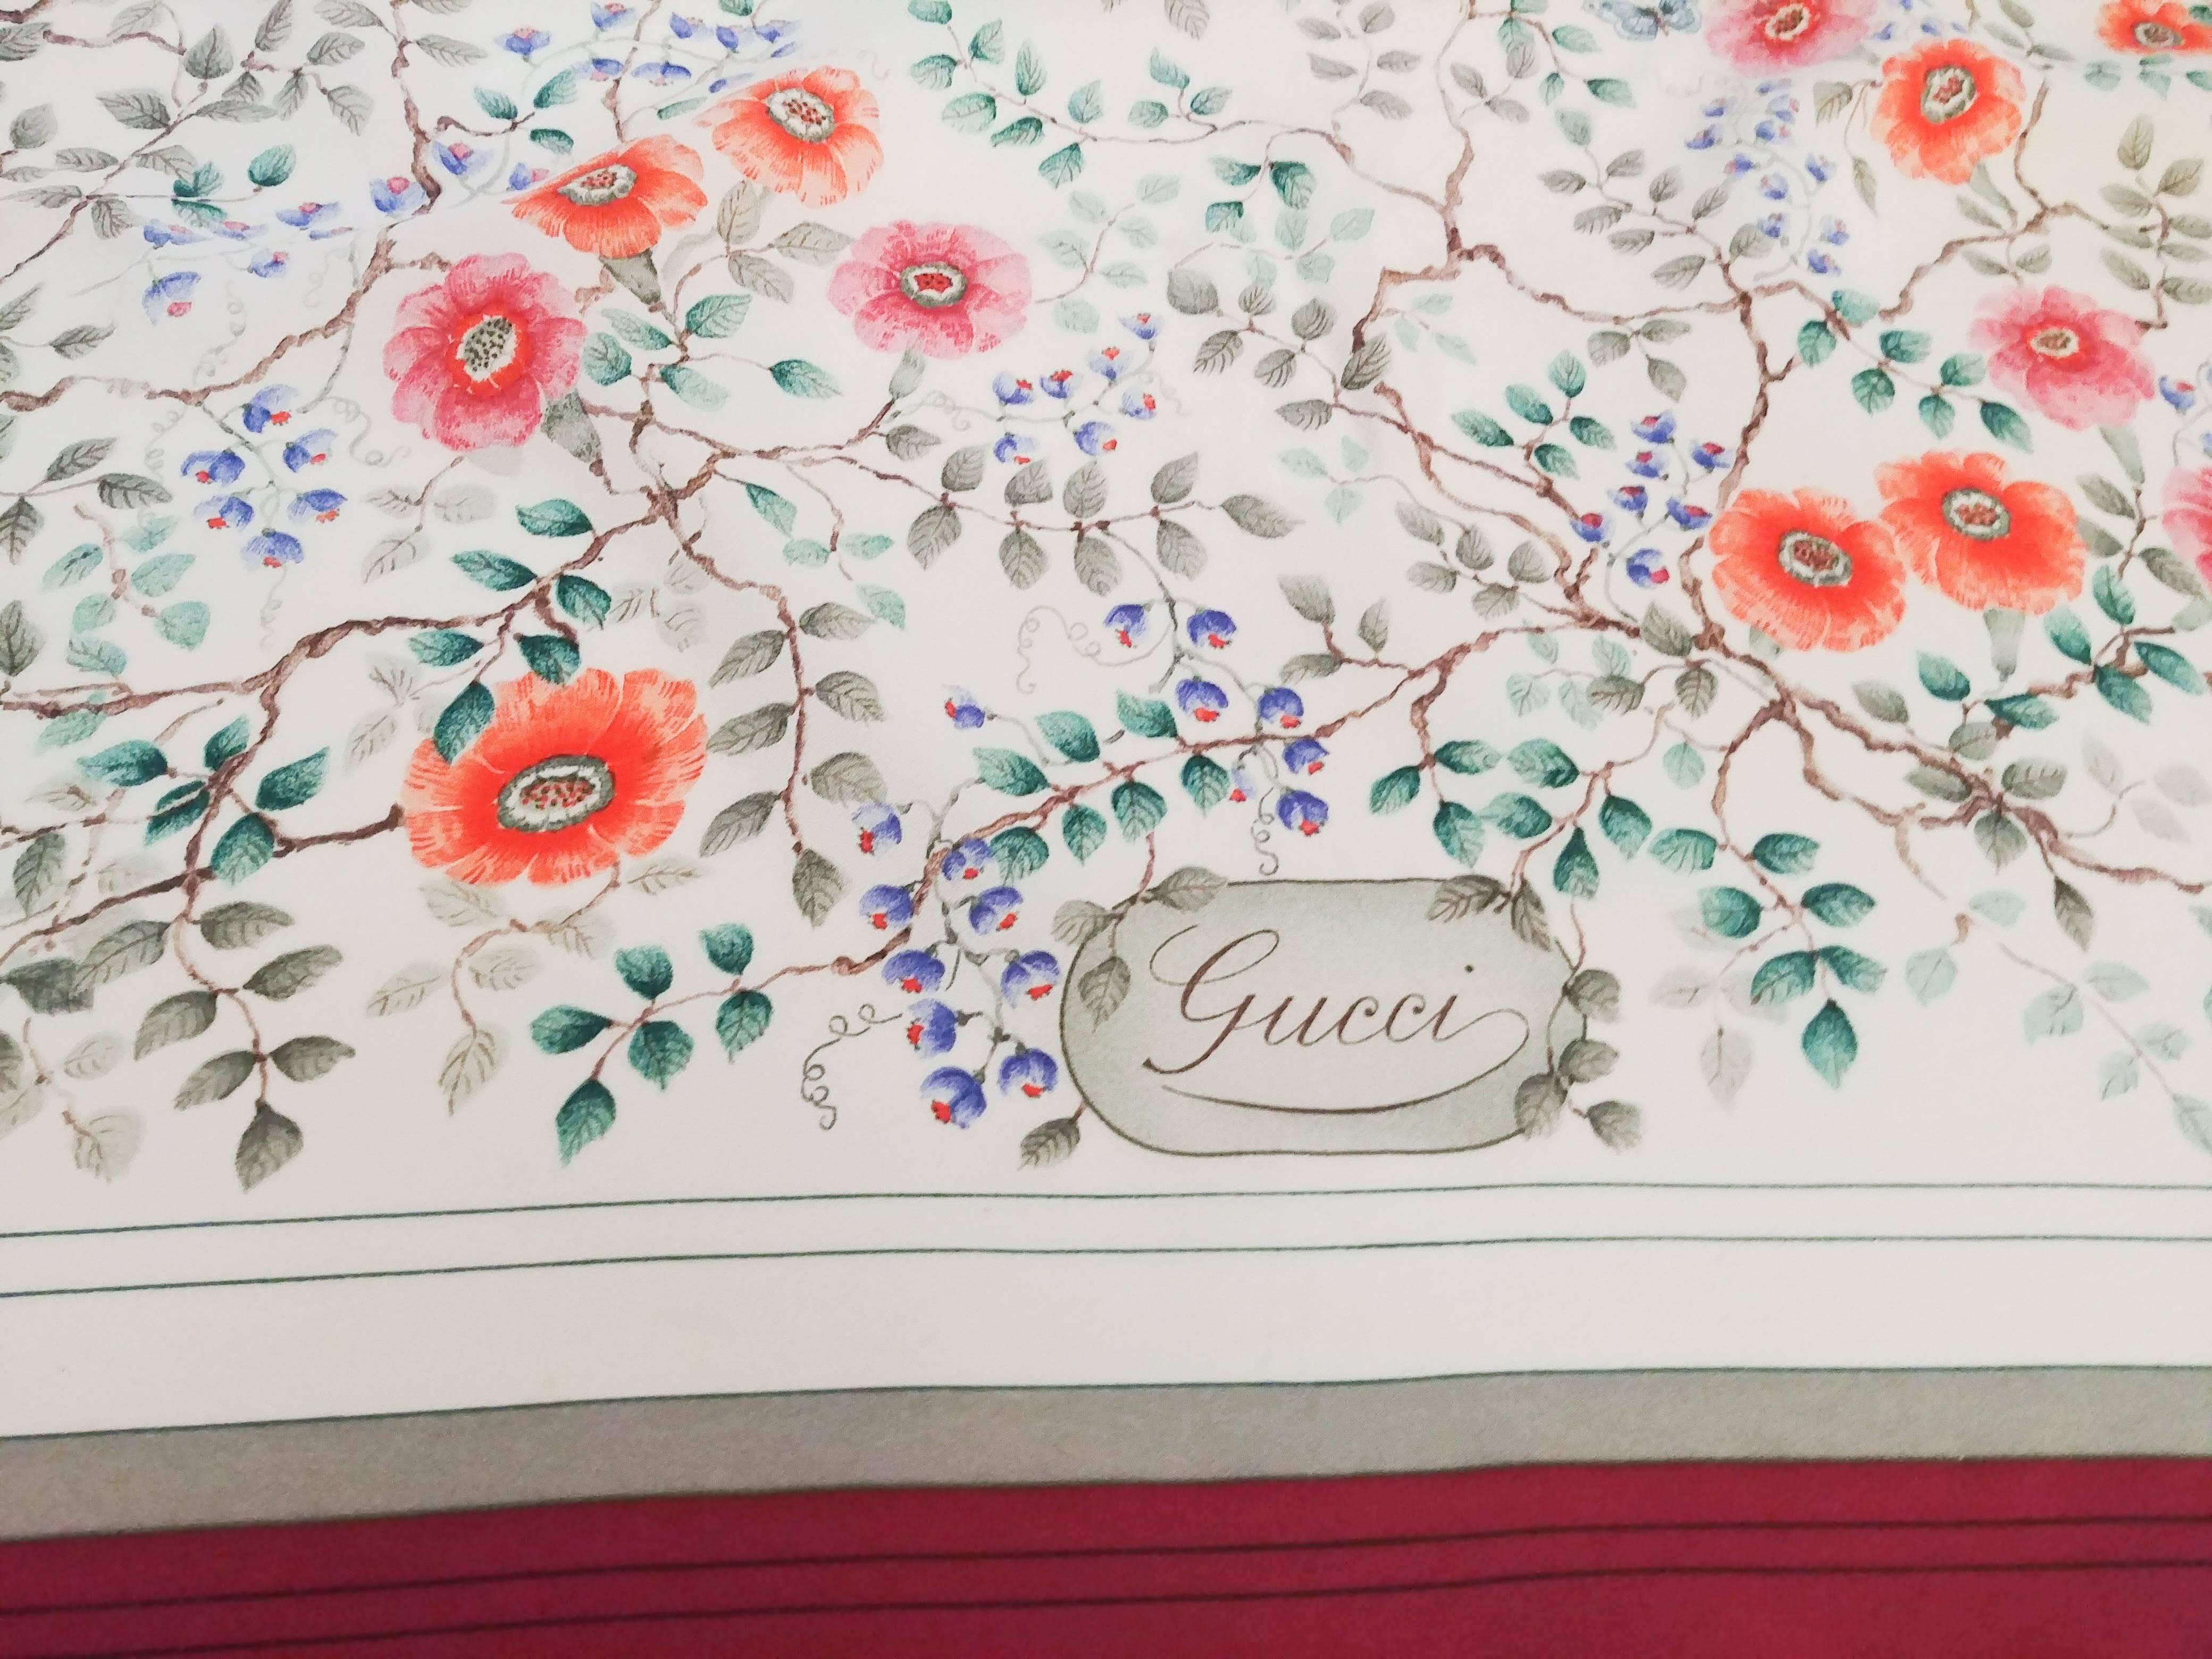 Gucci Floral Print Silk Scarf, 1970s. Red border, printed flowers on white background. Hand rolled.